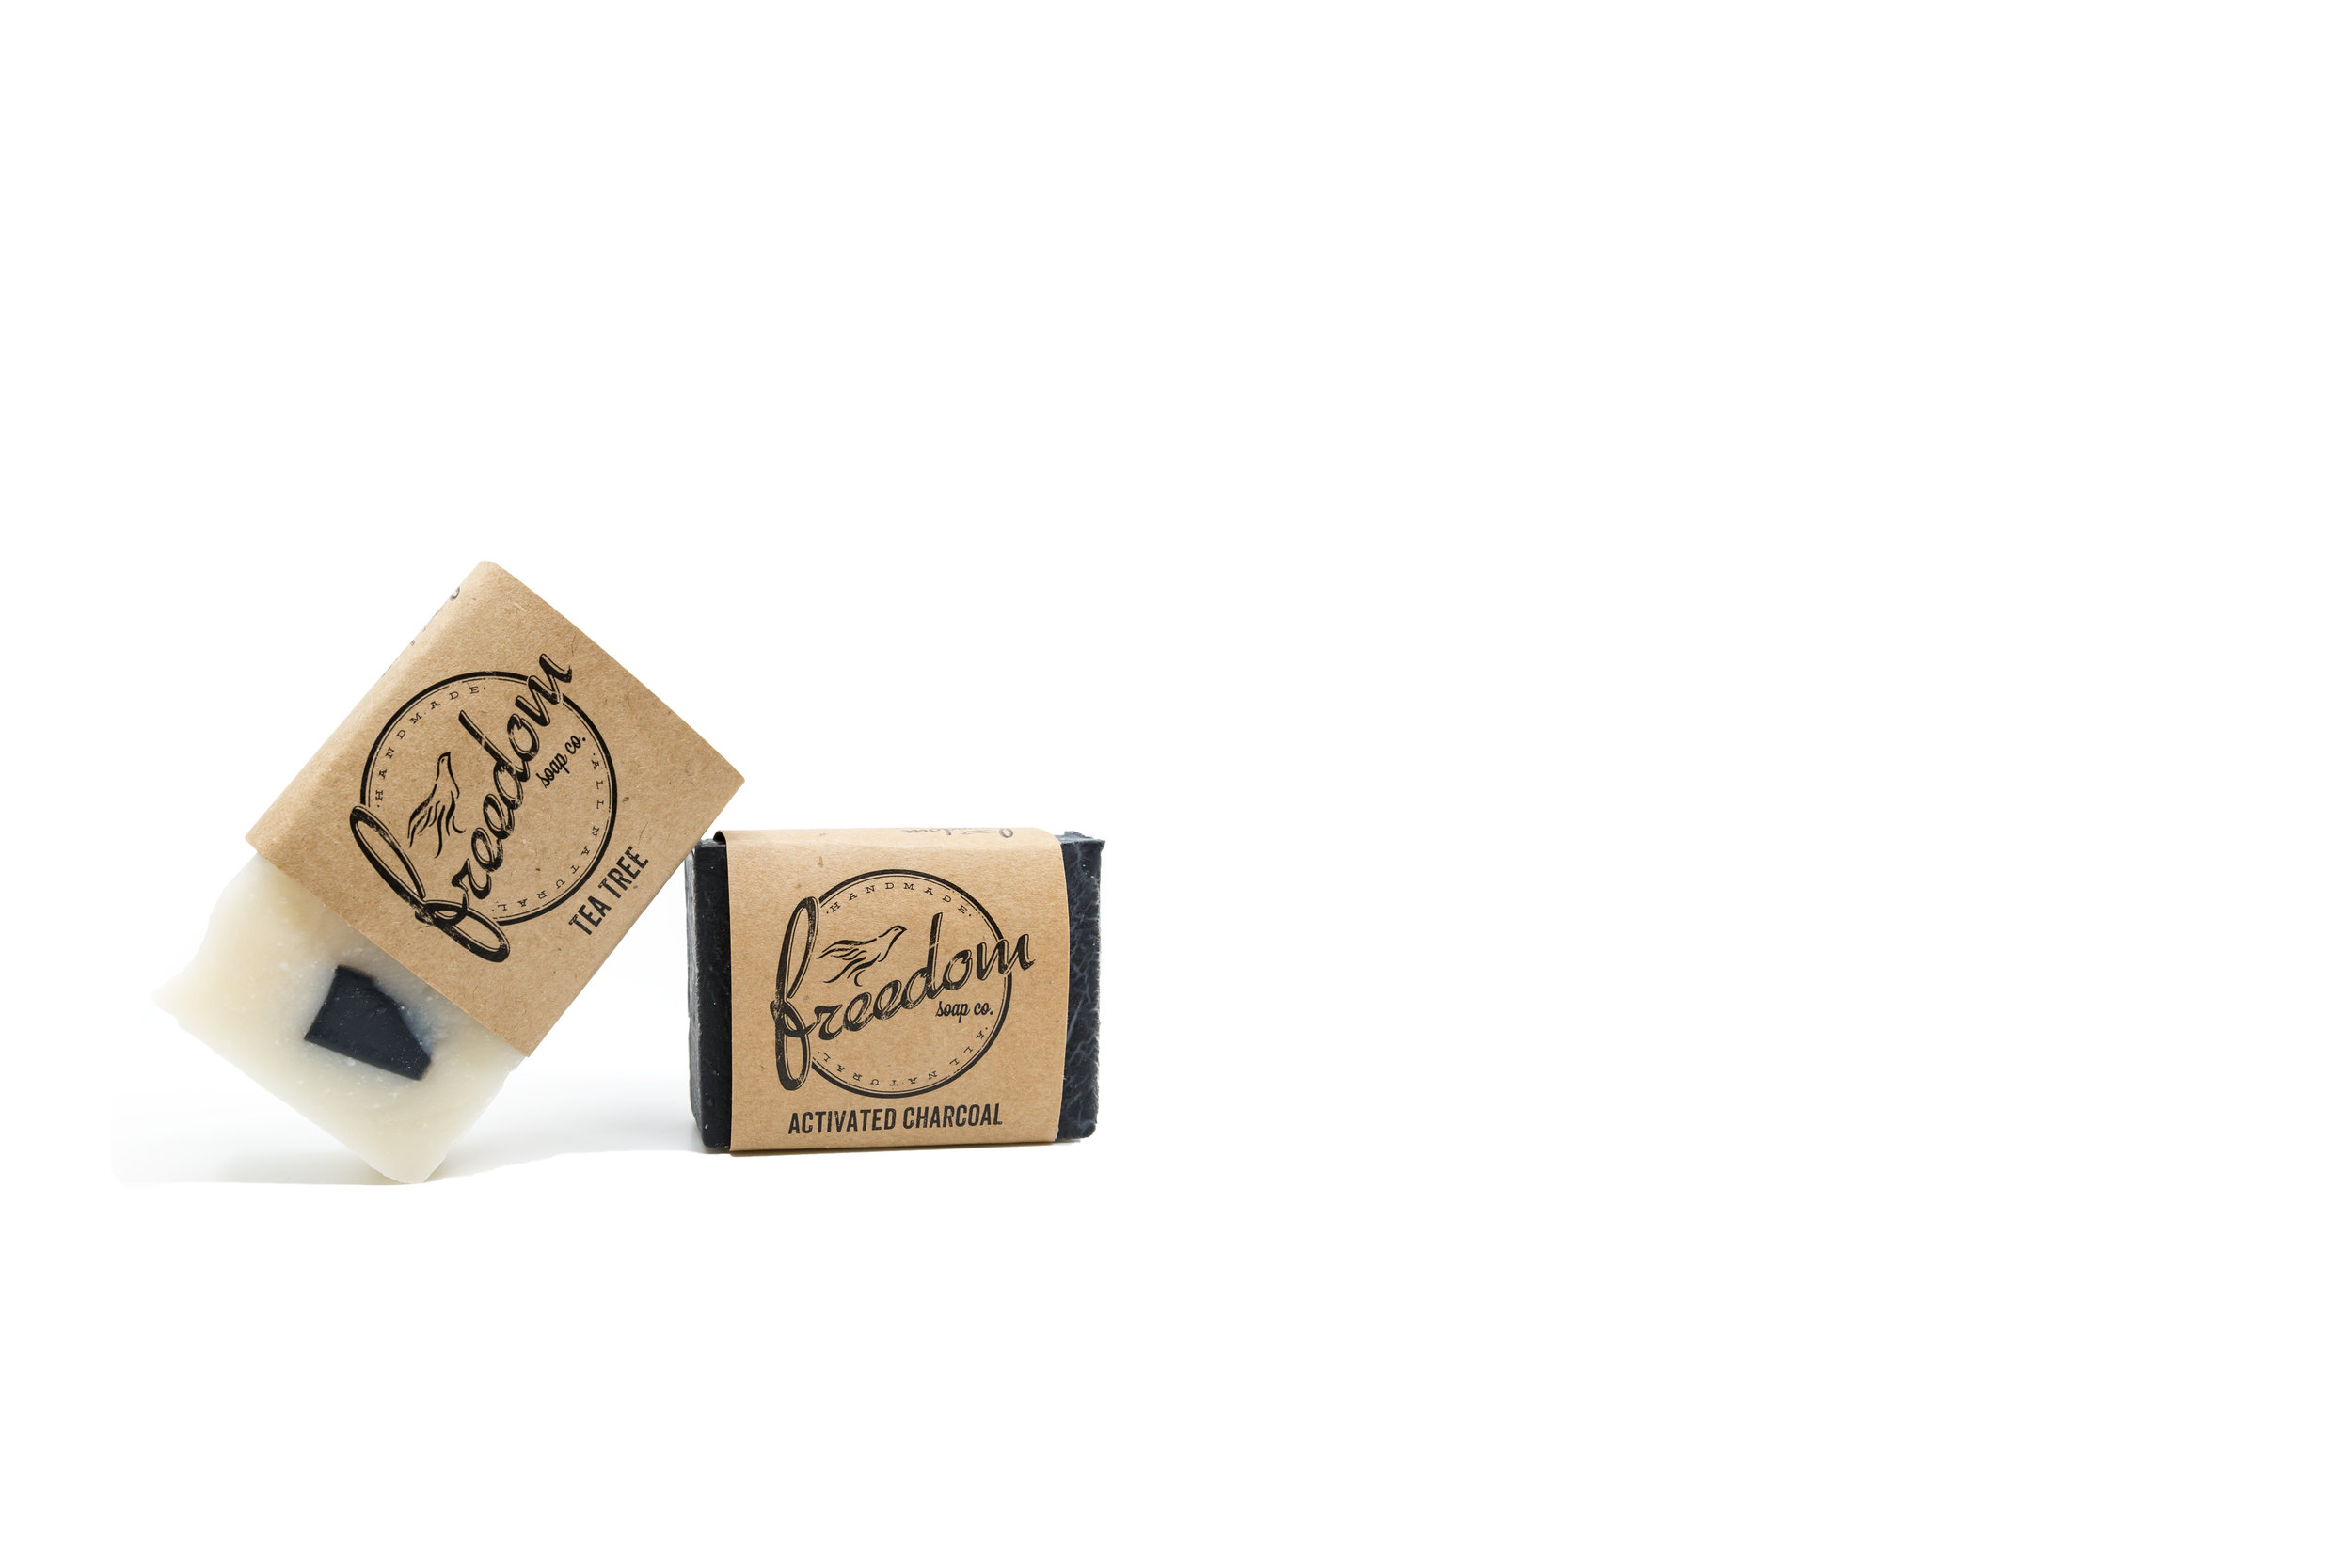 Product photography created for Freedom Soap Company featuring their all natural Tea Tree and Activated Charcoal soaps.